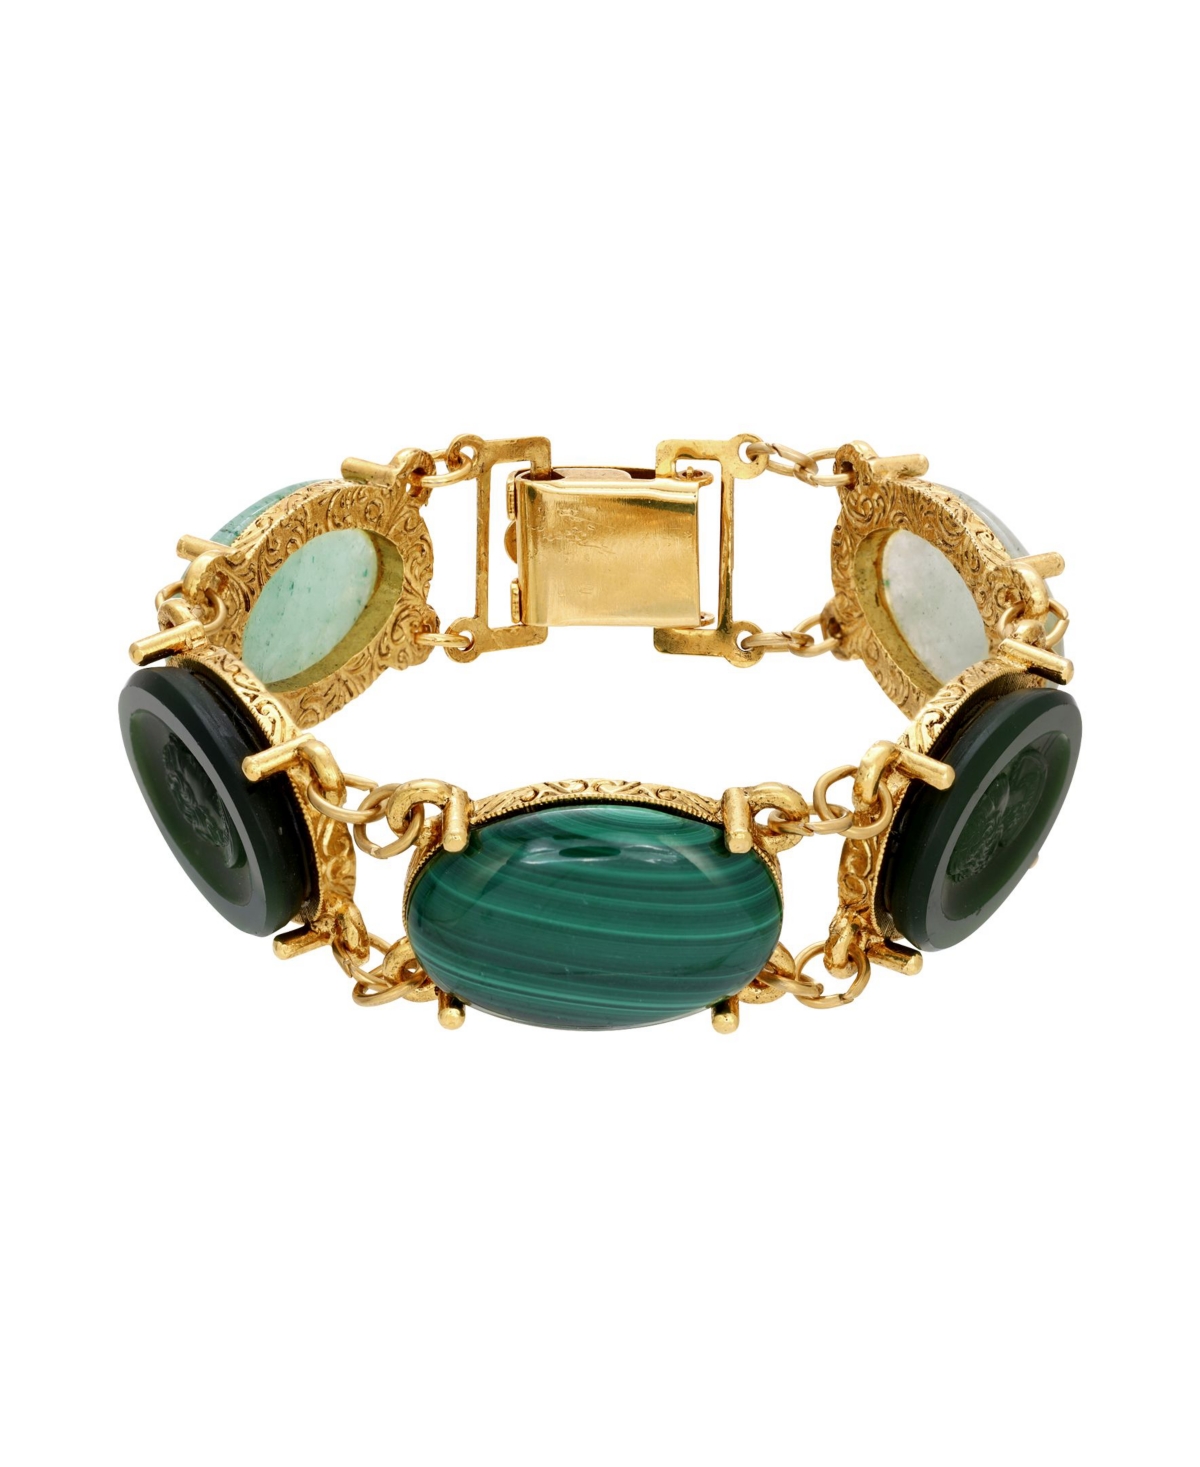 Victorian Costume Jewelry to Wear with Your Dress 2028 Gold-Tone Green Adventurine STone Link Bracelet - Green $59.50 AT vintagedancer.com